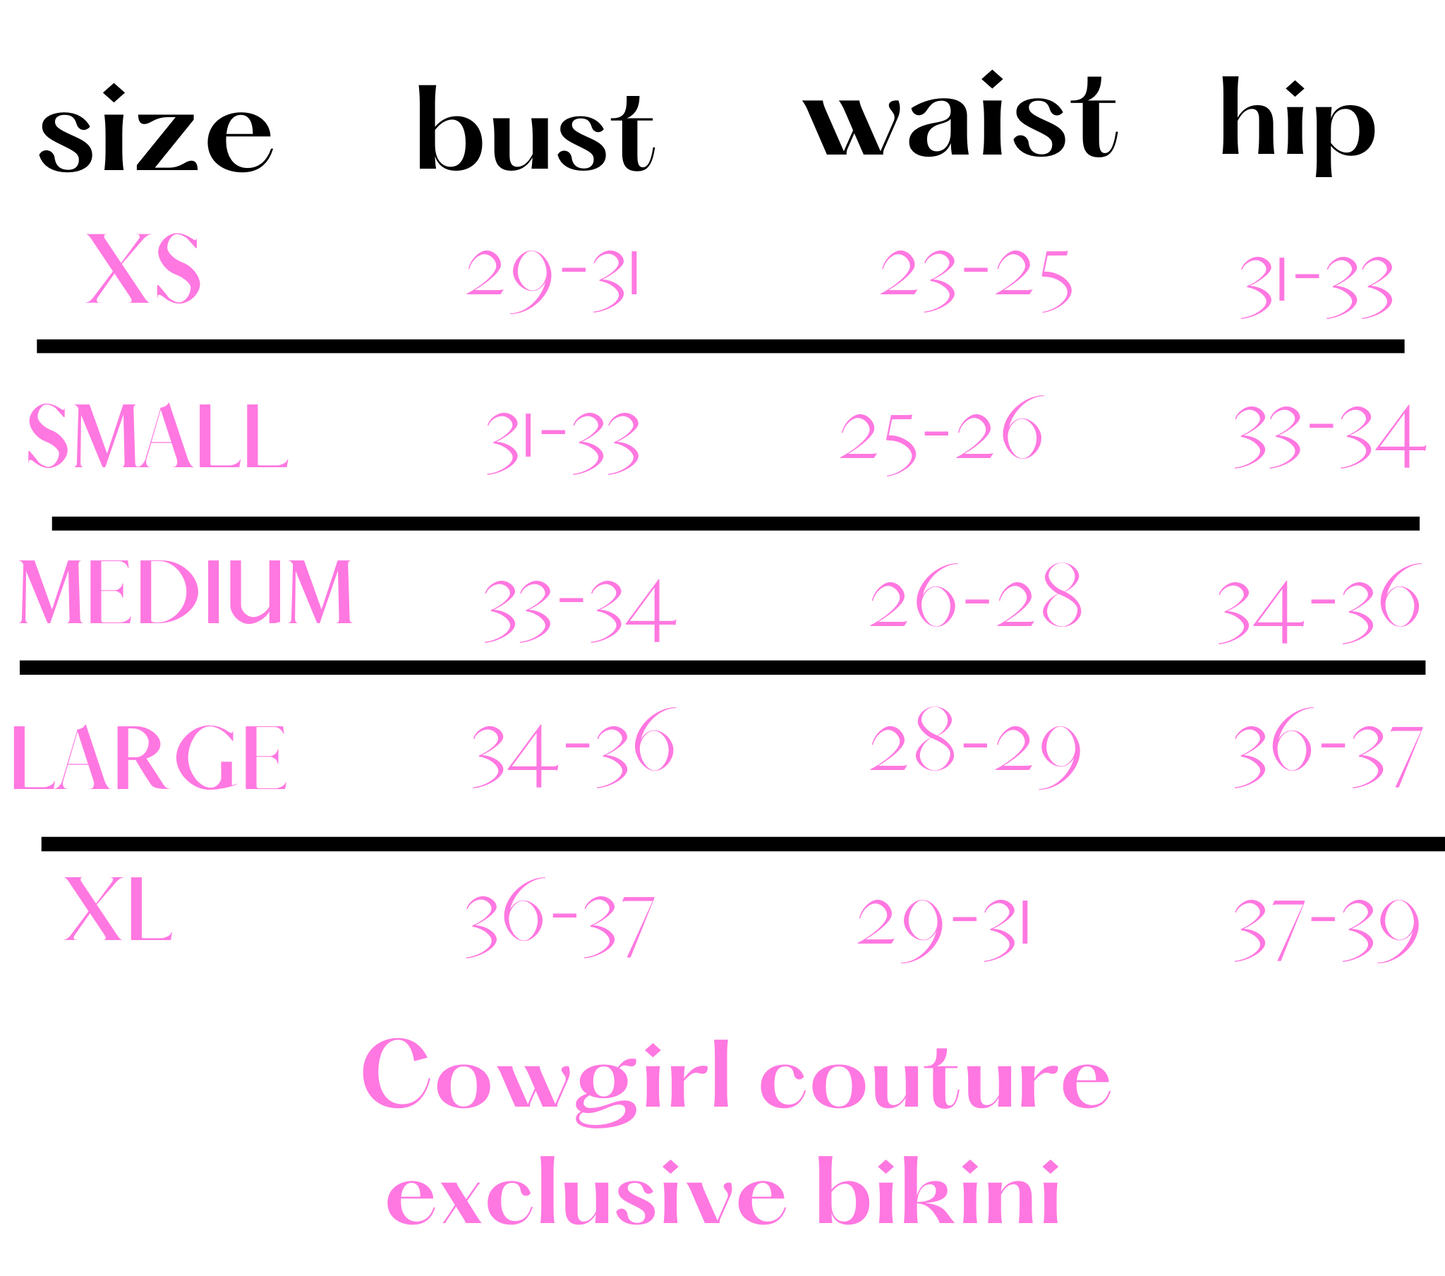 (Top only) Cowgirl Couture  exclusive bikini TOP READY TO SHIP